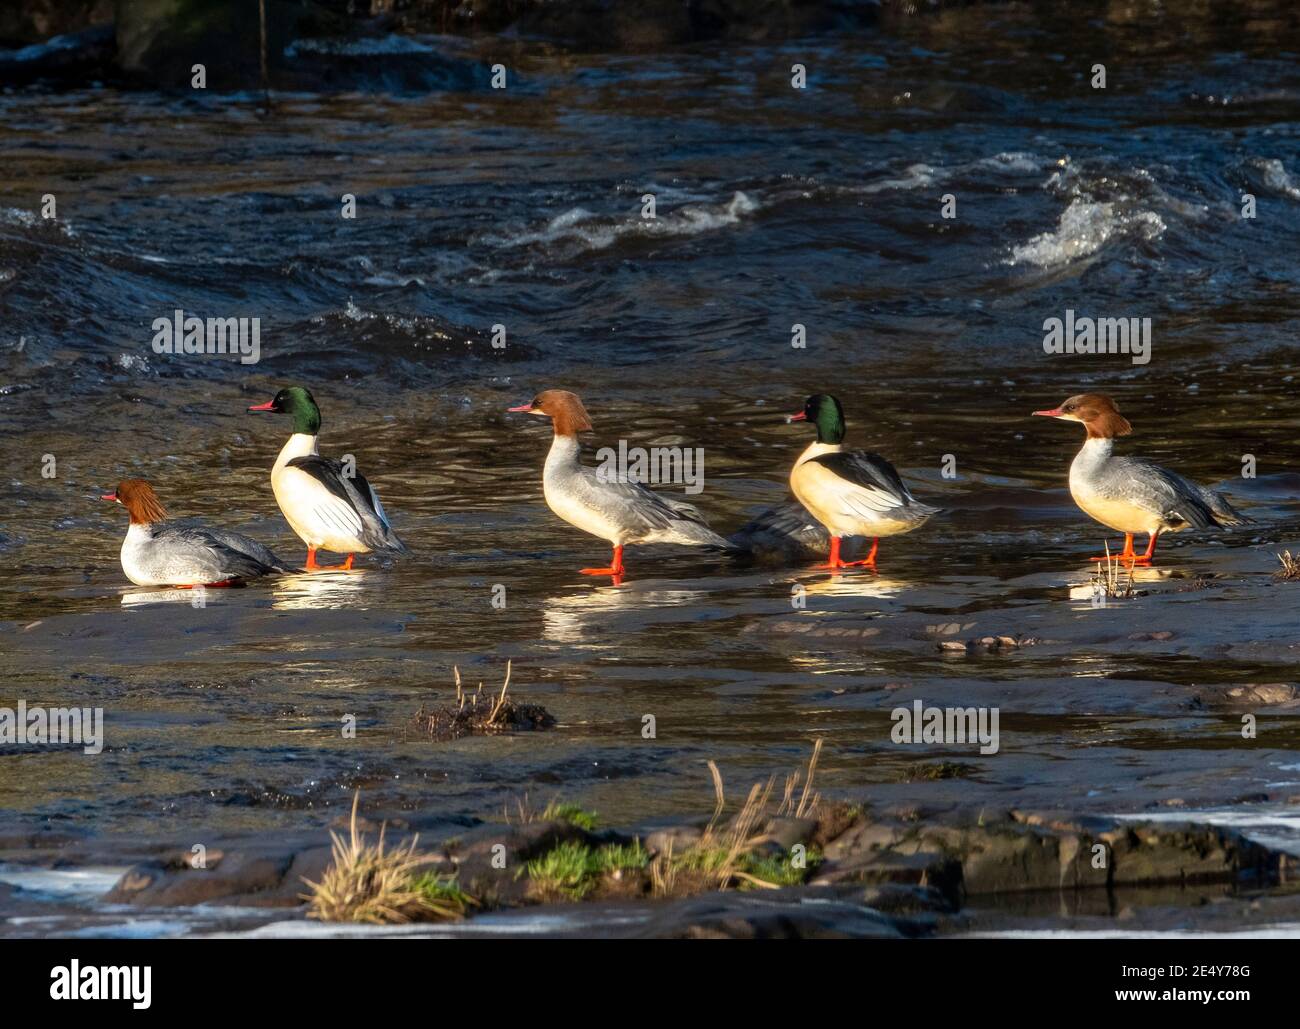 West Lothian, Scotland. 25th January 2021: (Mergus merganser) male (green head) and female (brown head) dry their feathers in the low winter sunlight on the River Almond, West Lothian, Scotland, UK.    Credit: Ian Rutherford/Alamy Live News. Stock Photo